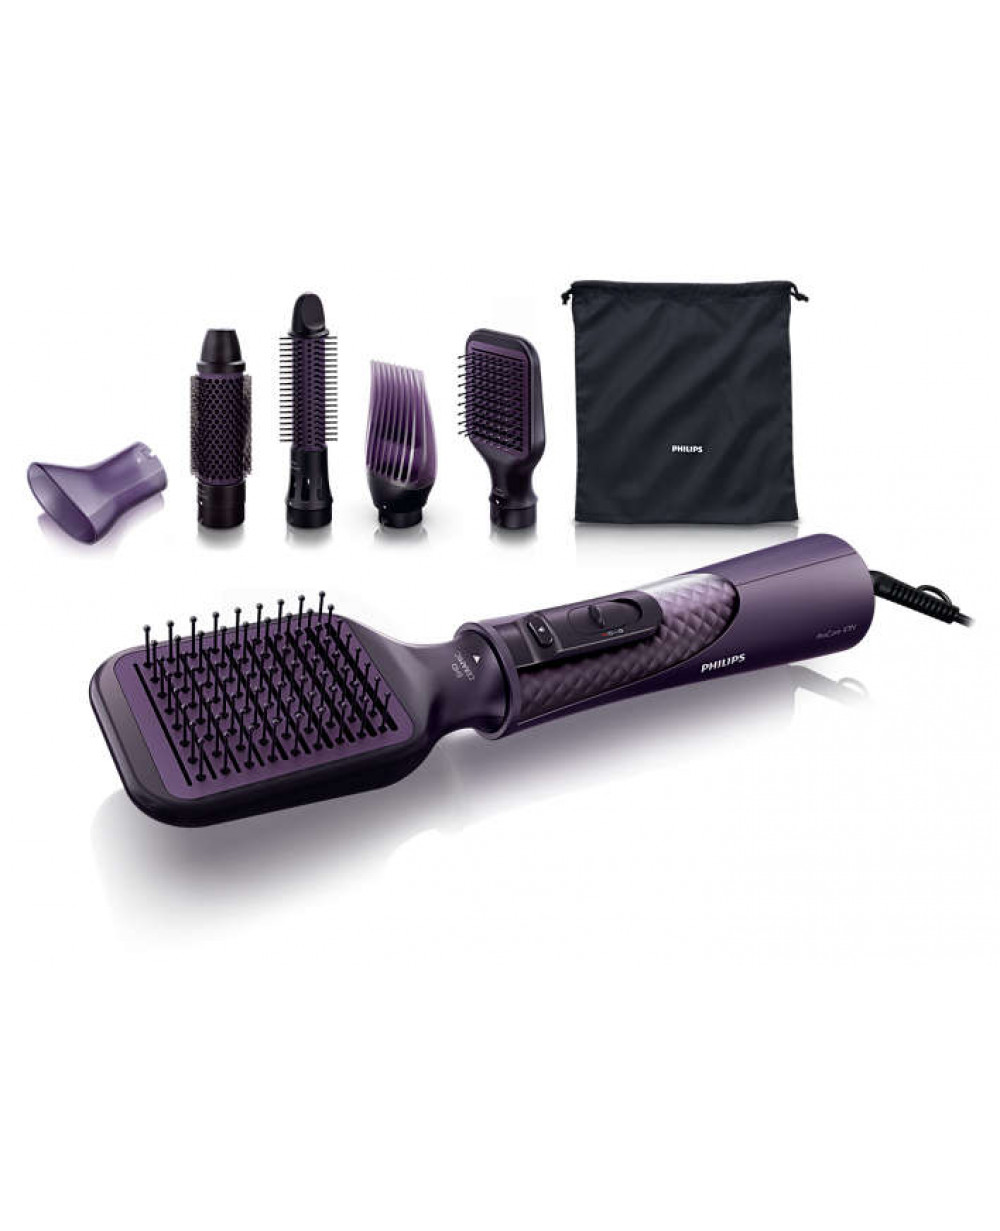 Philips Heated Straightening Brush BHH885/10 (New) 50 Watts, ThermoProtect  Technology & Multi Grooming Kit MG7715/65, 13-in-1 (New Model), Face, Head  & Body, All-in-one Trimmer Power adapt technology : Amazon.in: Beauty